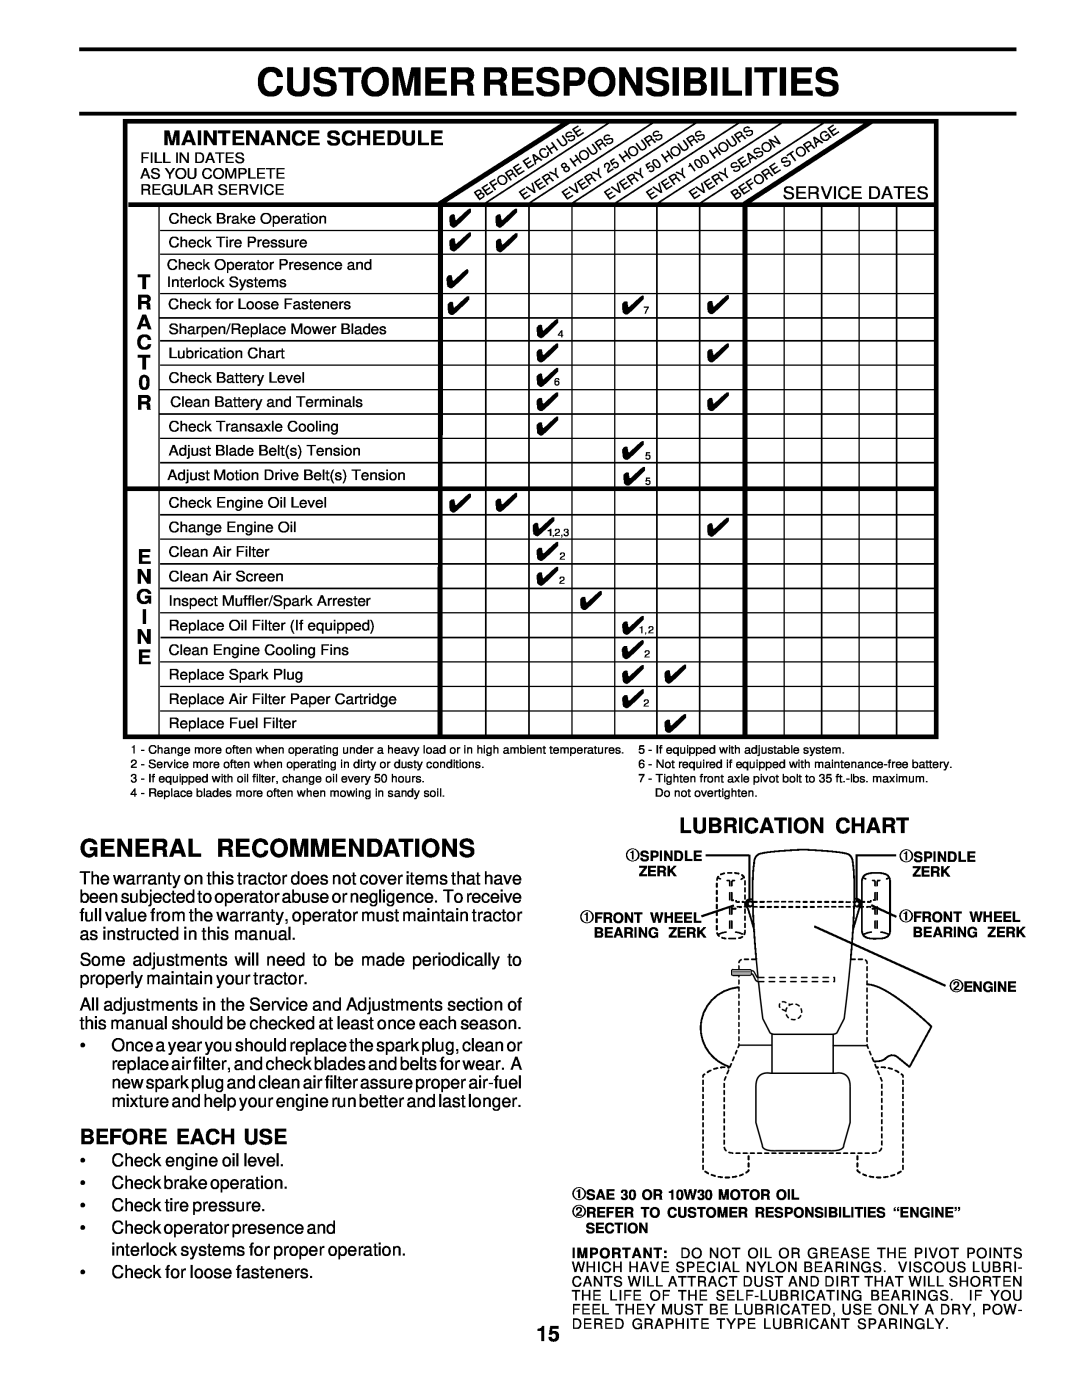 Poulan PO165H42A owner manual Customer Responsibilities, General Recommendations, Before Each Use, Maintenance Schedule 